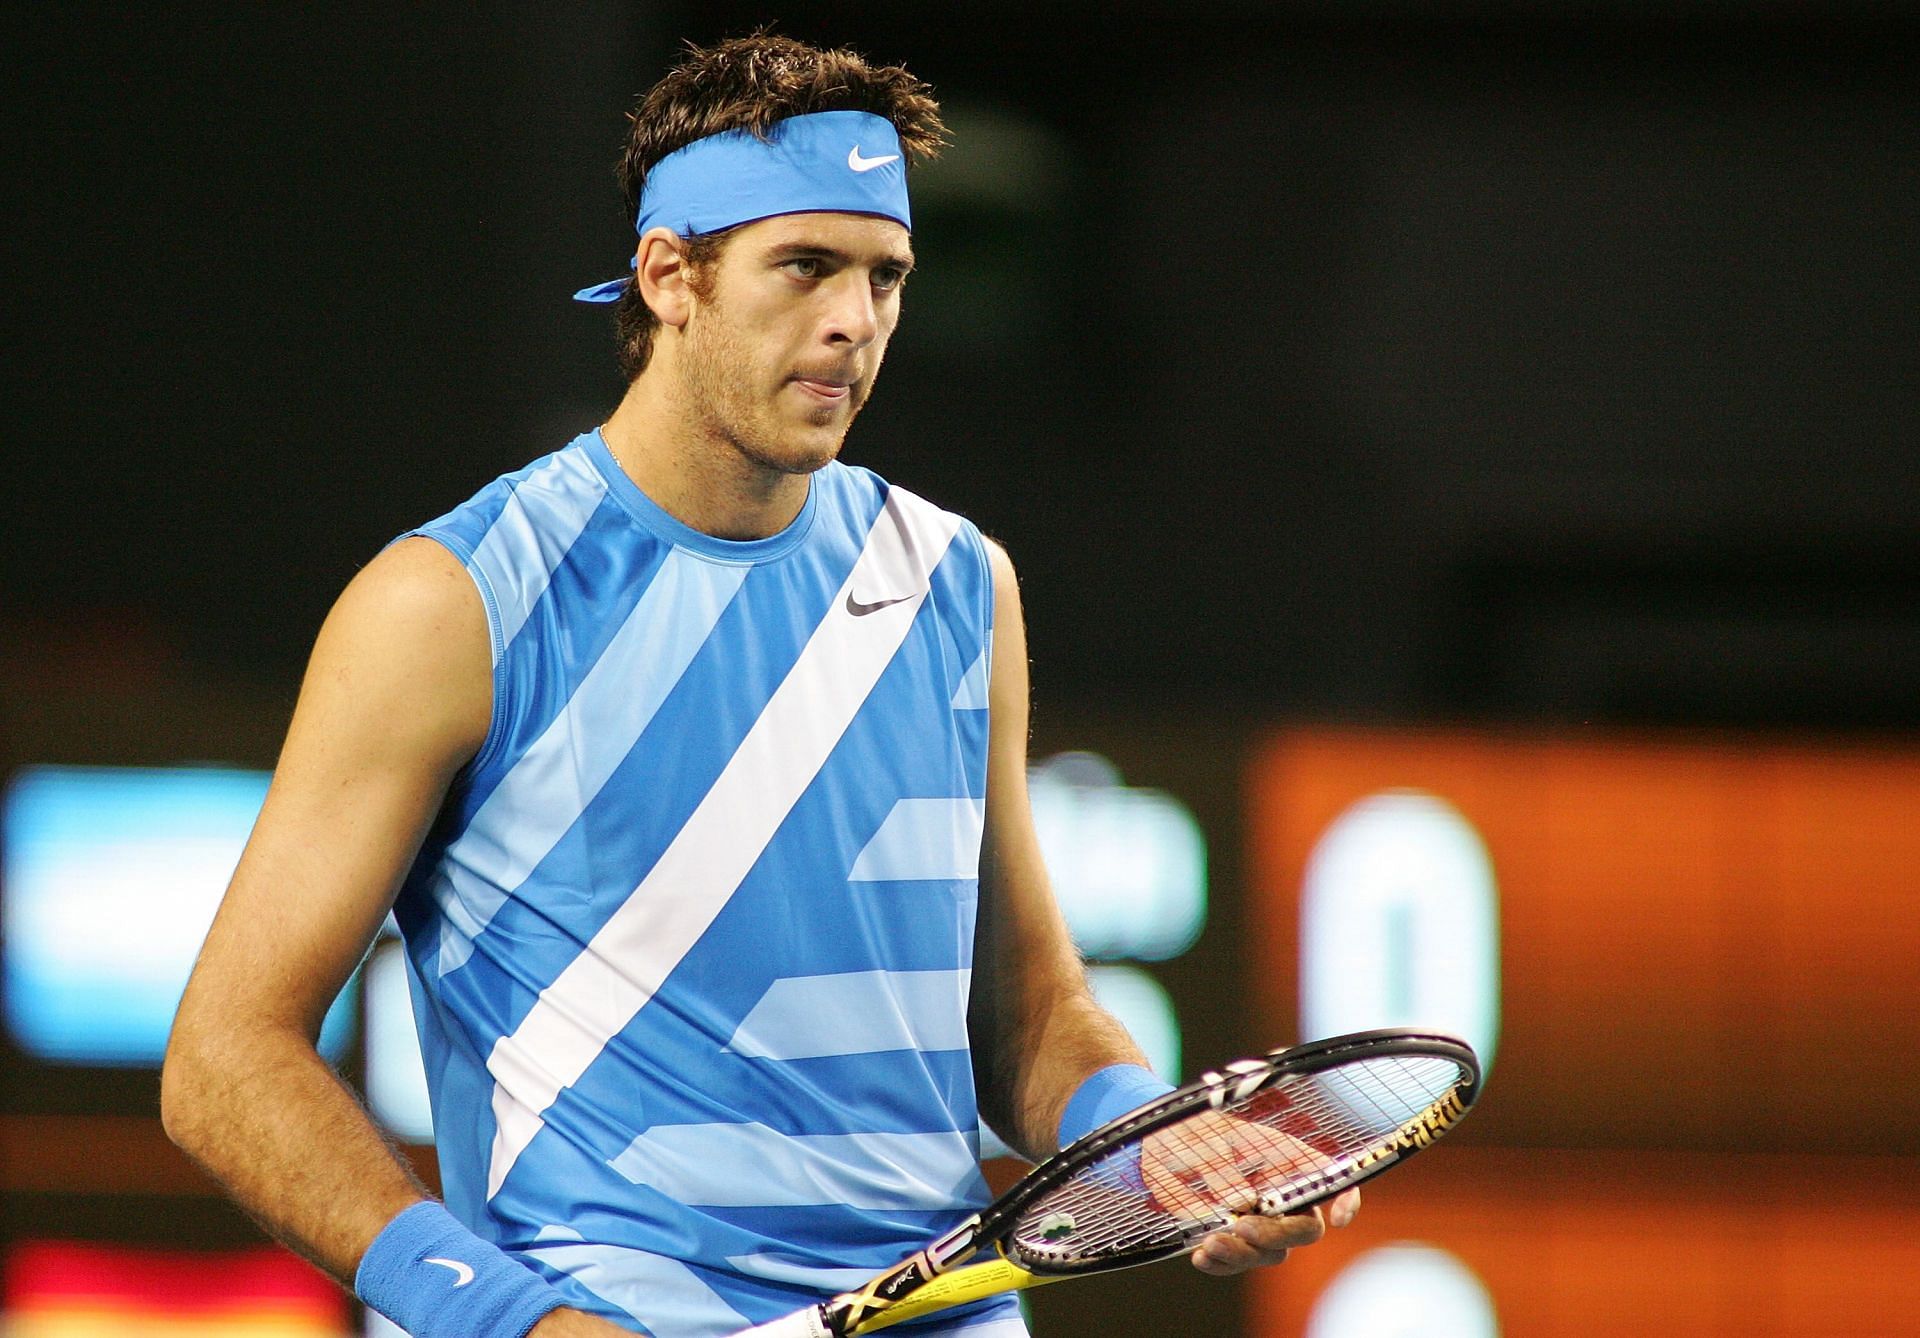 Juan Martin del Potro&#039;s stream of injuries began in 2010, and he was never the same again